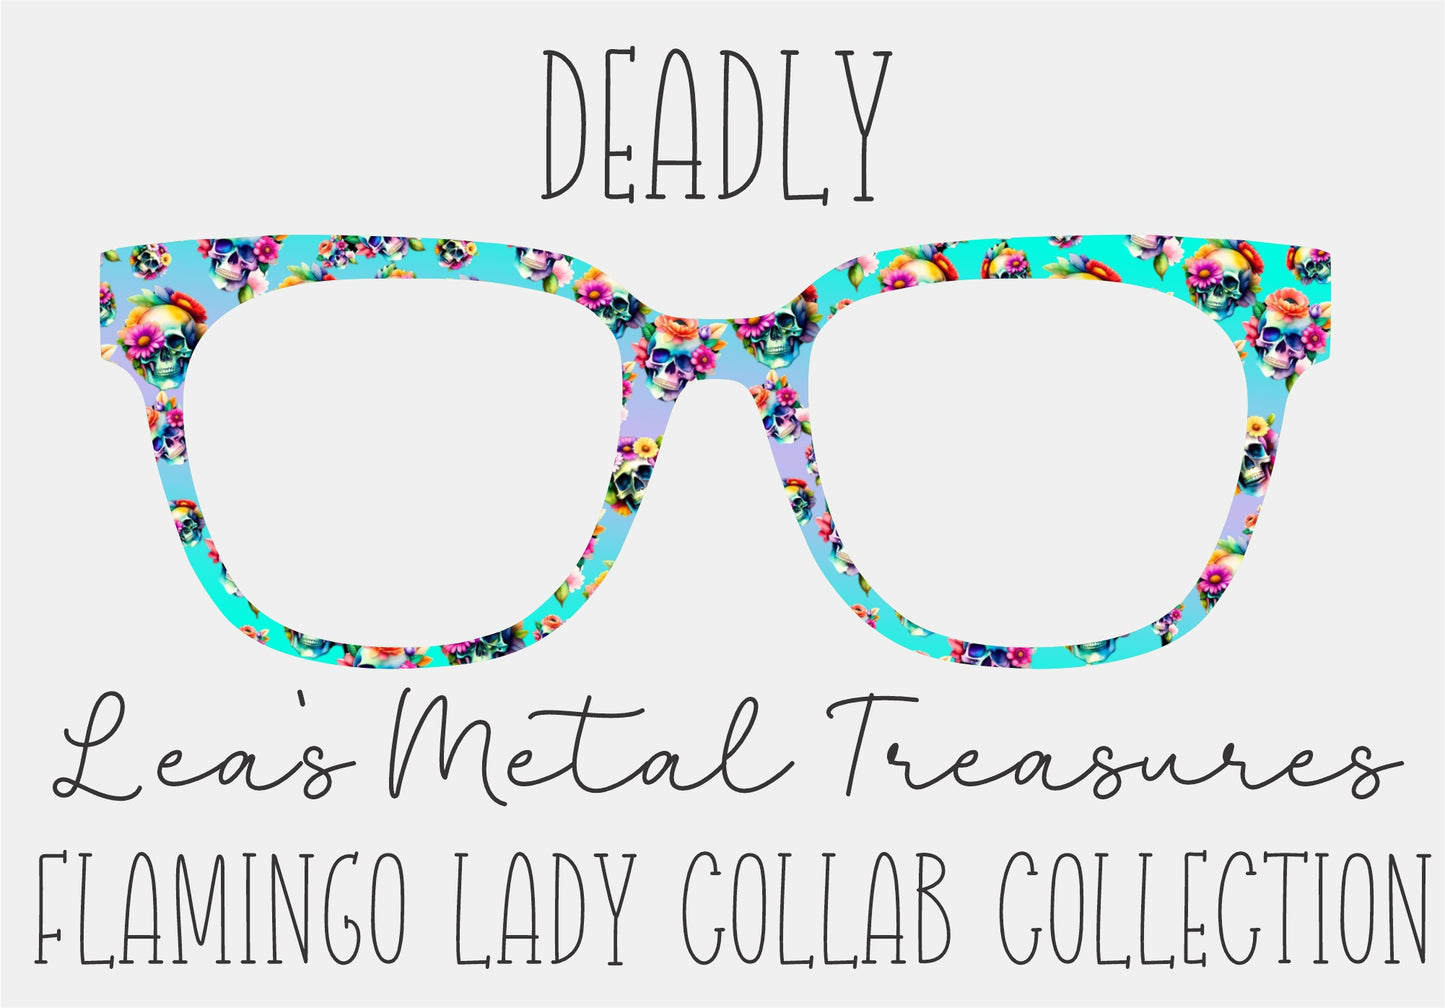 Deadly Magnetic Eyeglasses Topper • The Flamingo Lady Collab Collection